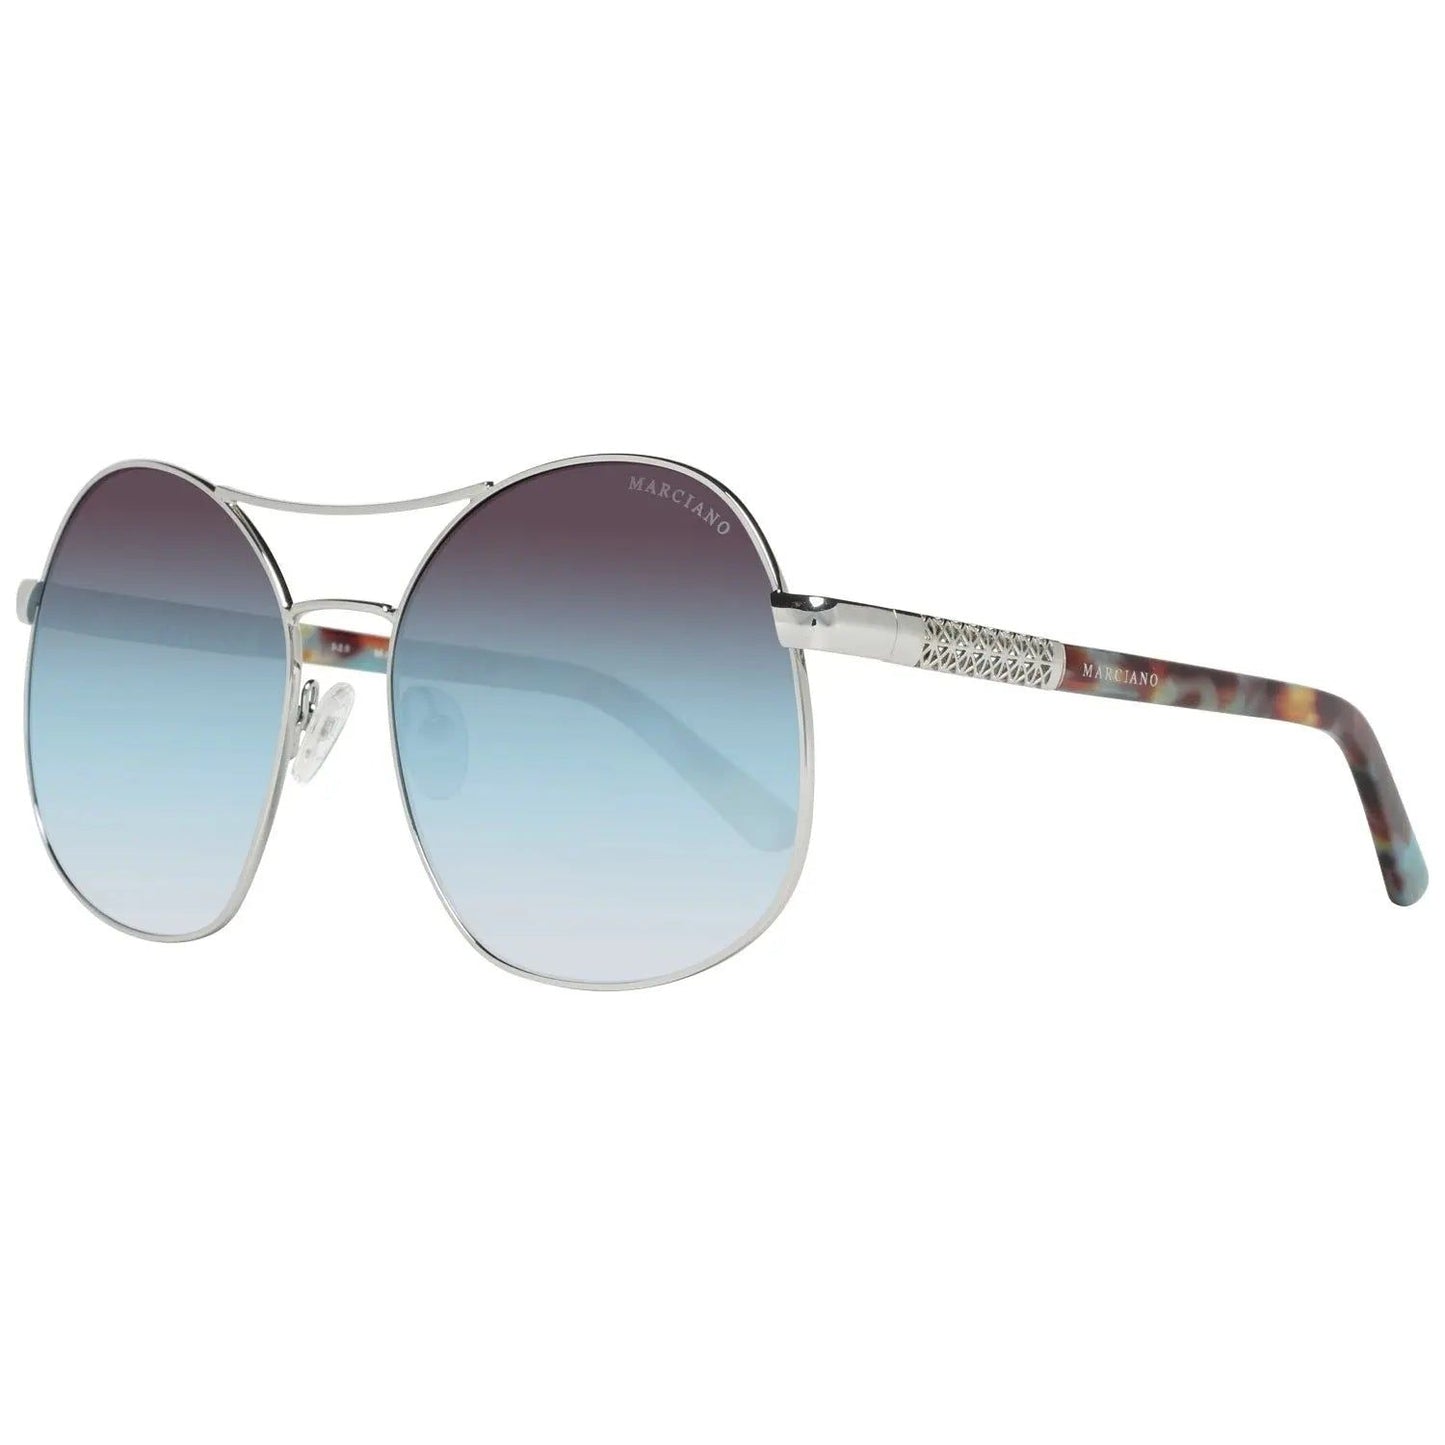 MARCIANO By GUESS SUNGLASSES MARCIANO BY GUESS MOD. GM0807 6210W SUNGLASSES & EYEWEAR marciano-by-guess-mod-gm0807-6210w